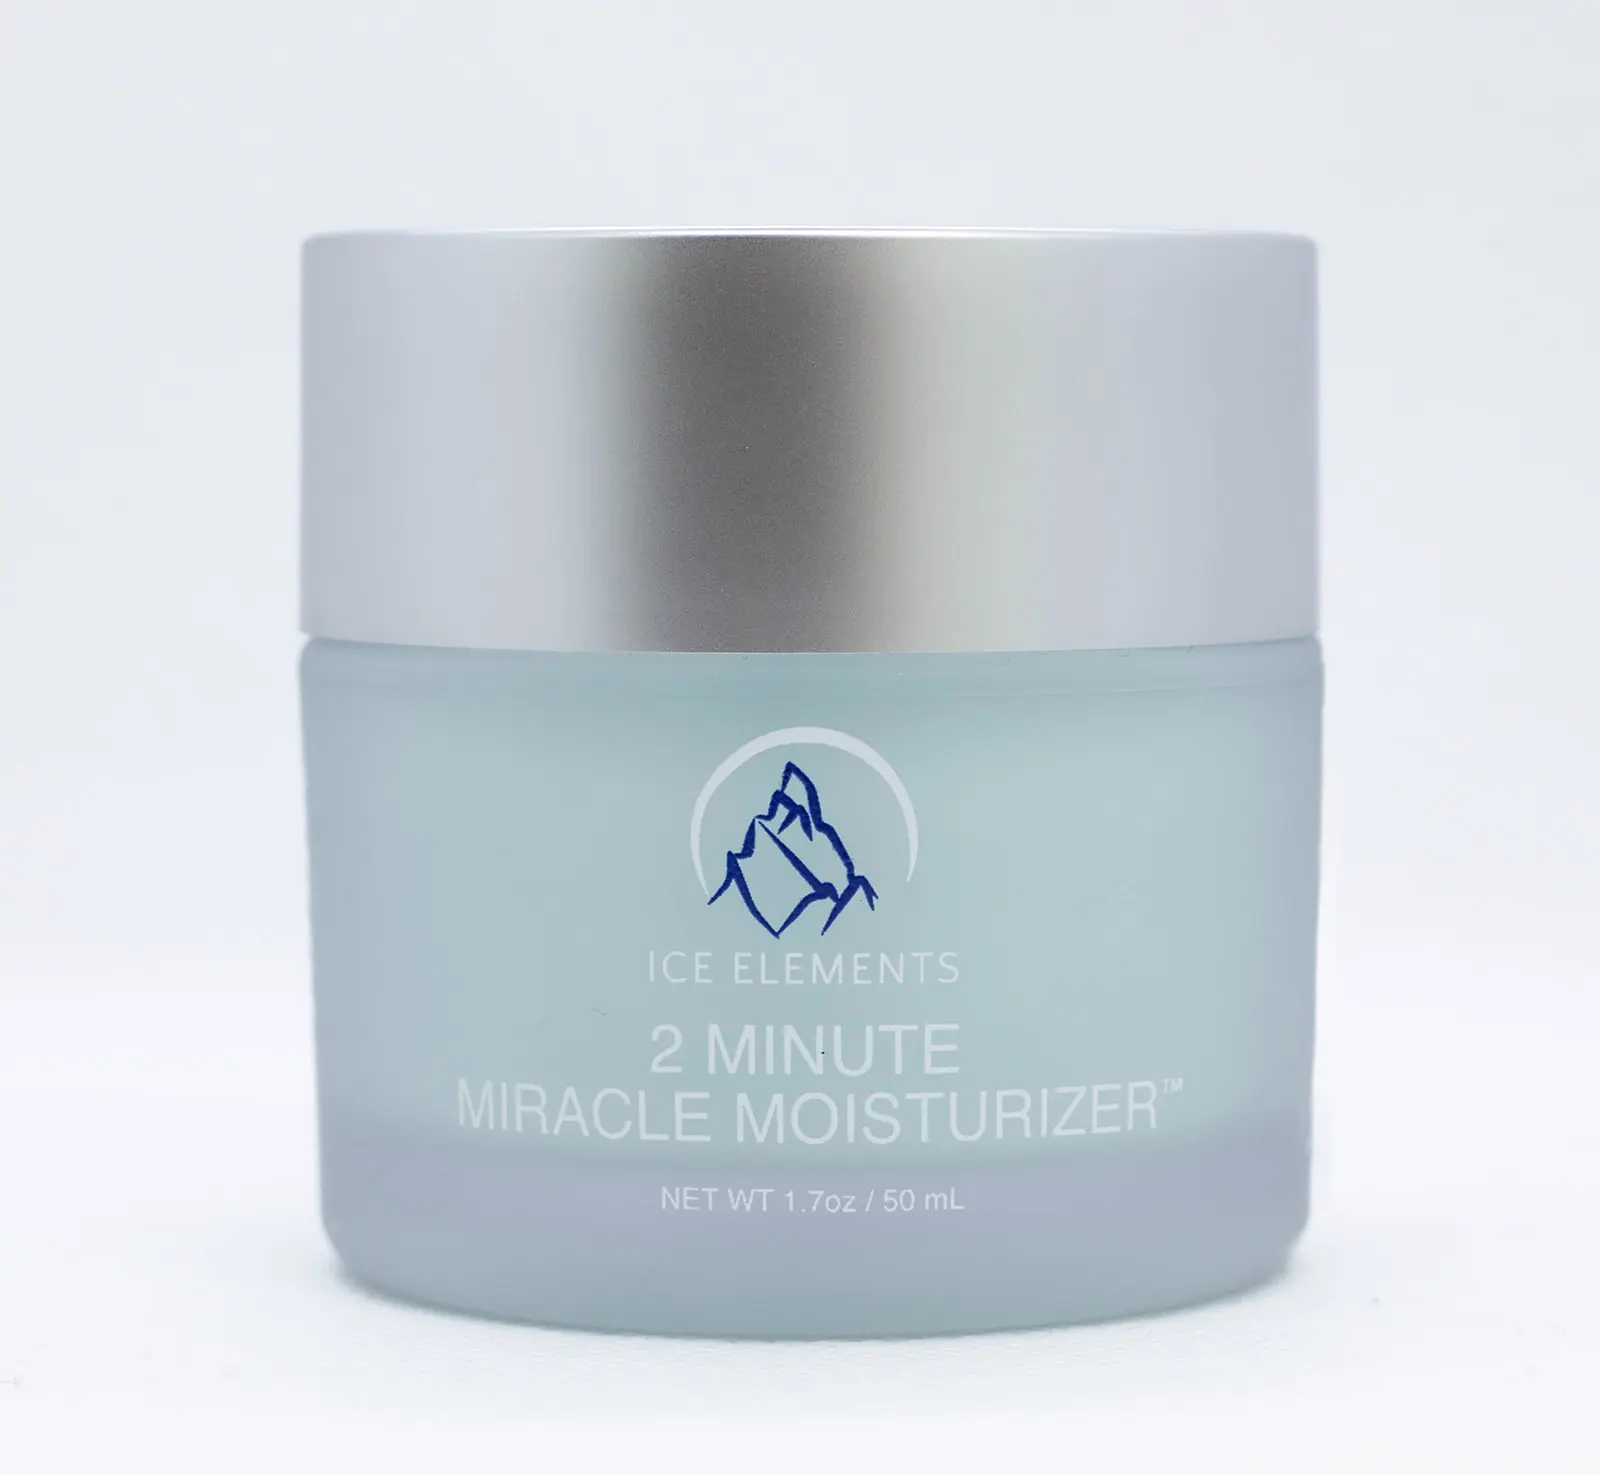 2 Minute Miracle Moisturizer